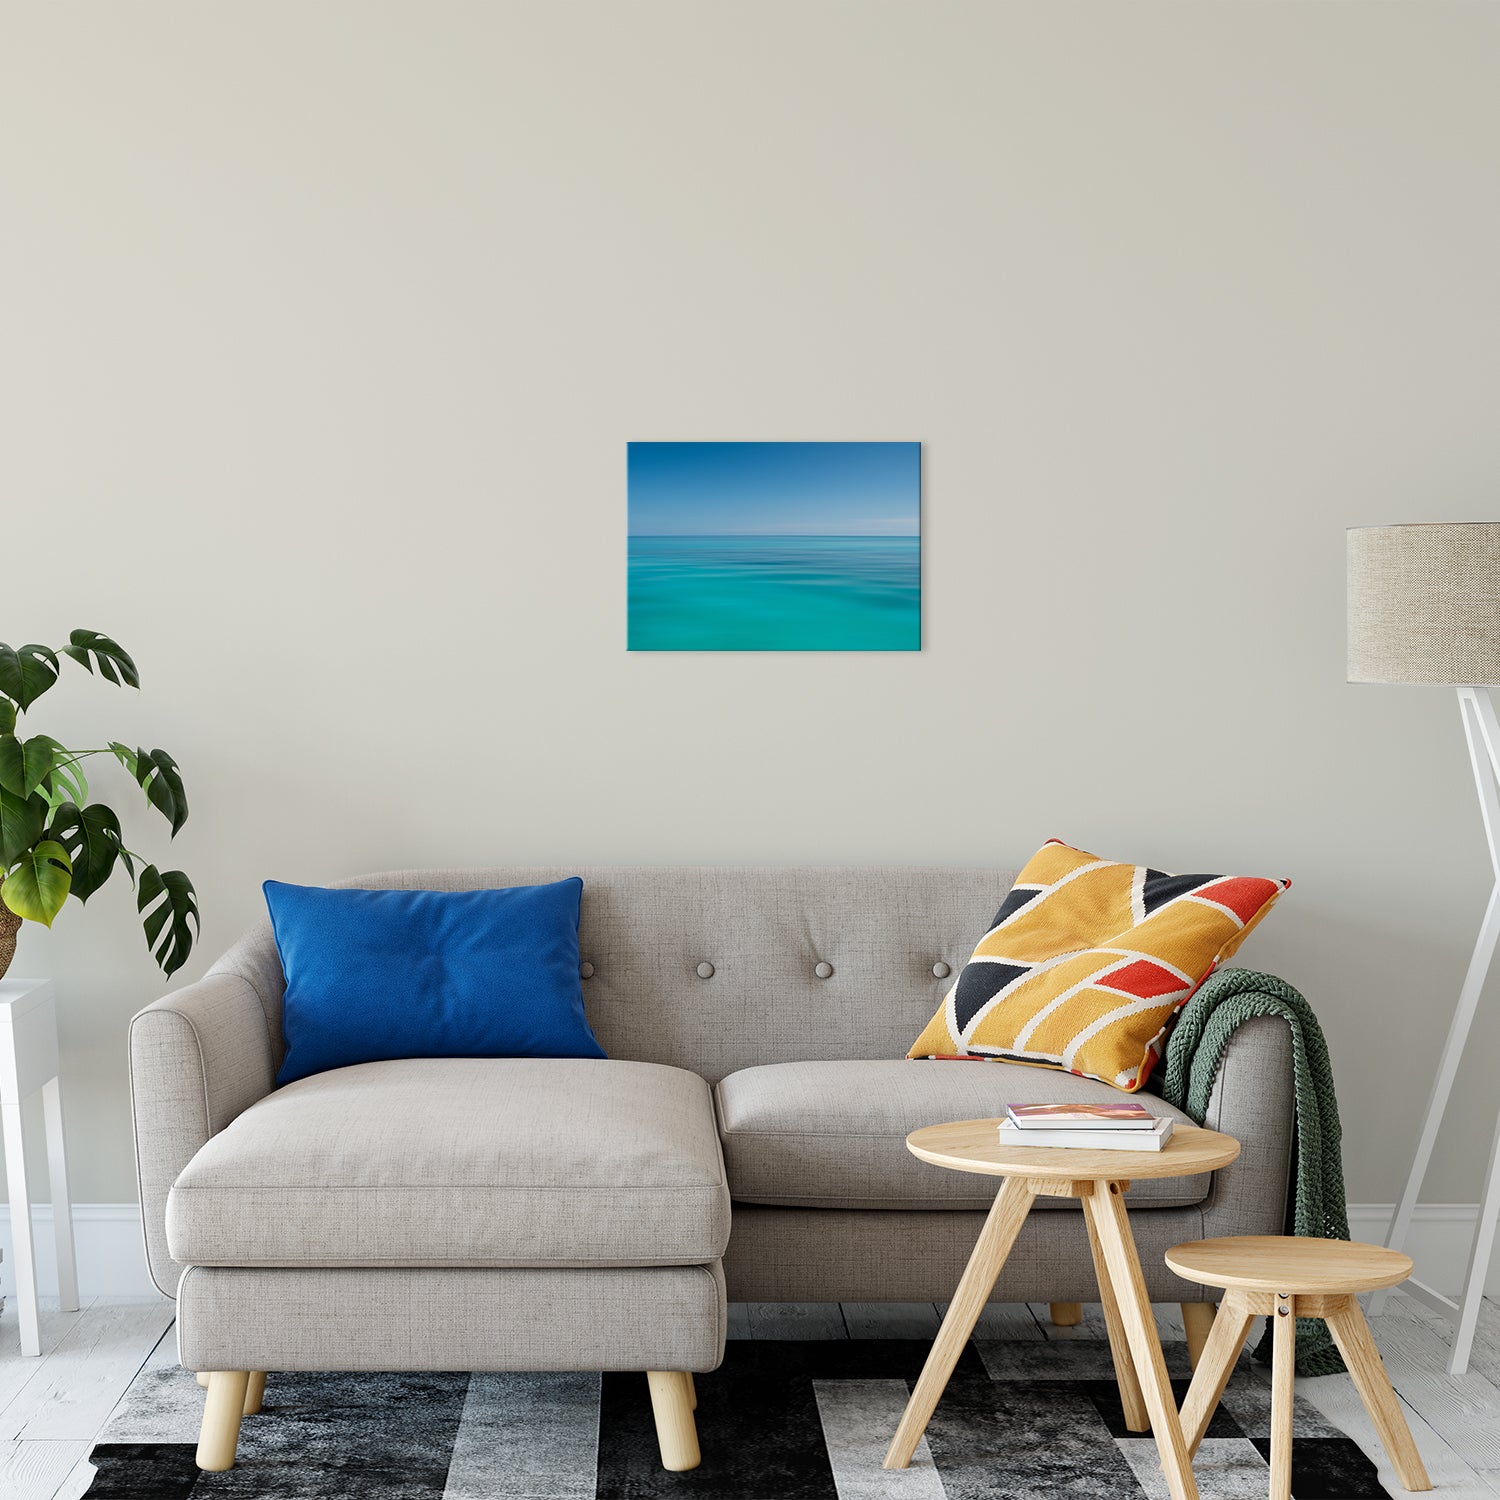 Colors of The Tropical Sea Abstract Coastal Landscape Fine Art Canvas Prints 16" x 20" - PIPAFINEART